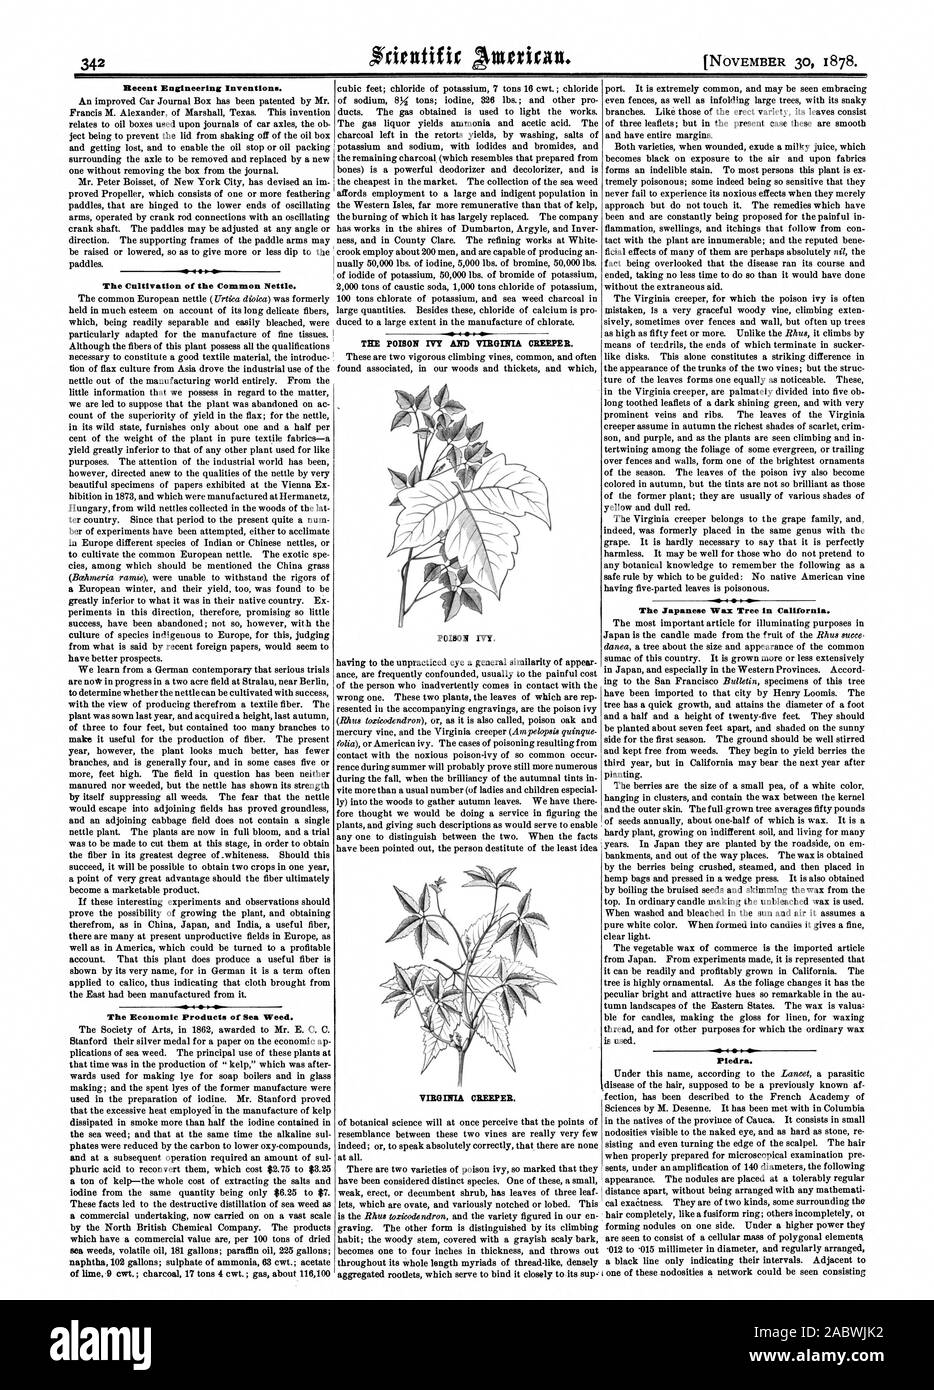 Recent Engineering Inventions. lip The Cultivation of the Common Nettle. The Economic Products of Sea Weed. THE POISON IVY AND VIRGESIA CREWEL POISON IVY. VIRGINIA CREEPER. The Japanese Wax Tree in California. Piedra., scientific american, 1878-11-30 Stock Photo